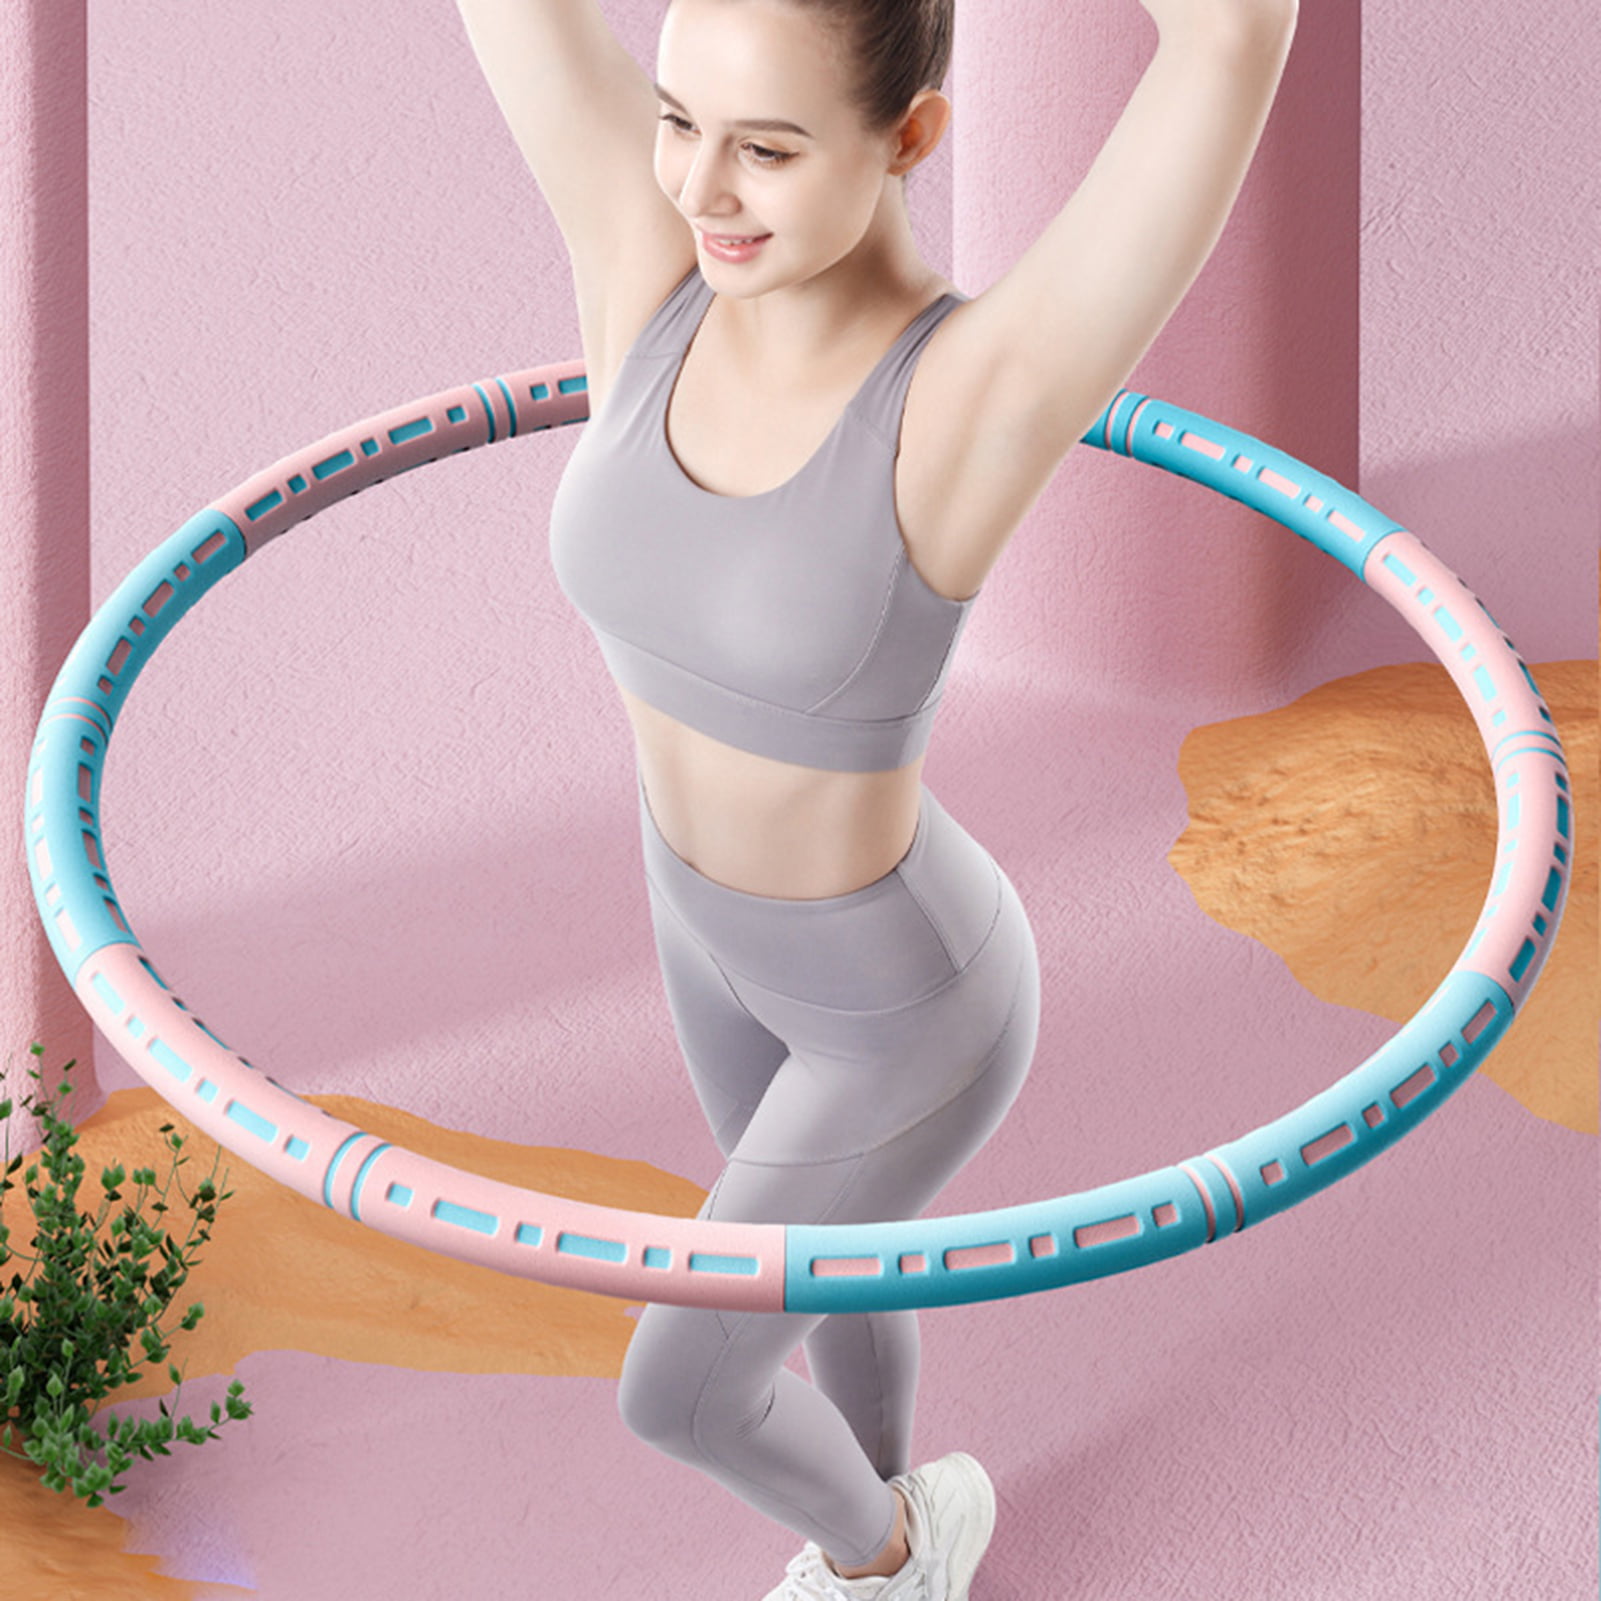 Hula hoop Kids Fitness Exercise Yoga Multicolor Playing Indoor Outdoor Home 